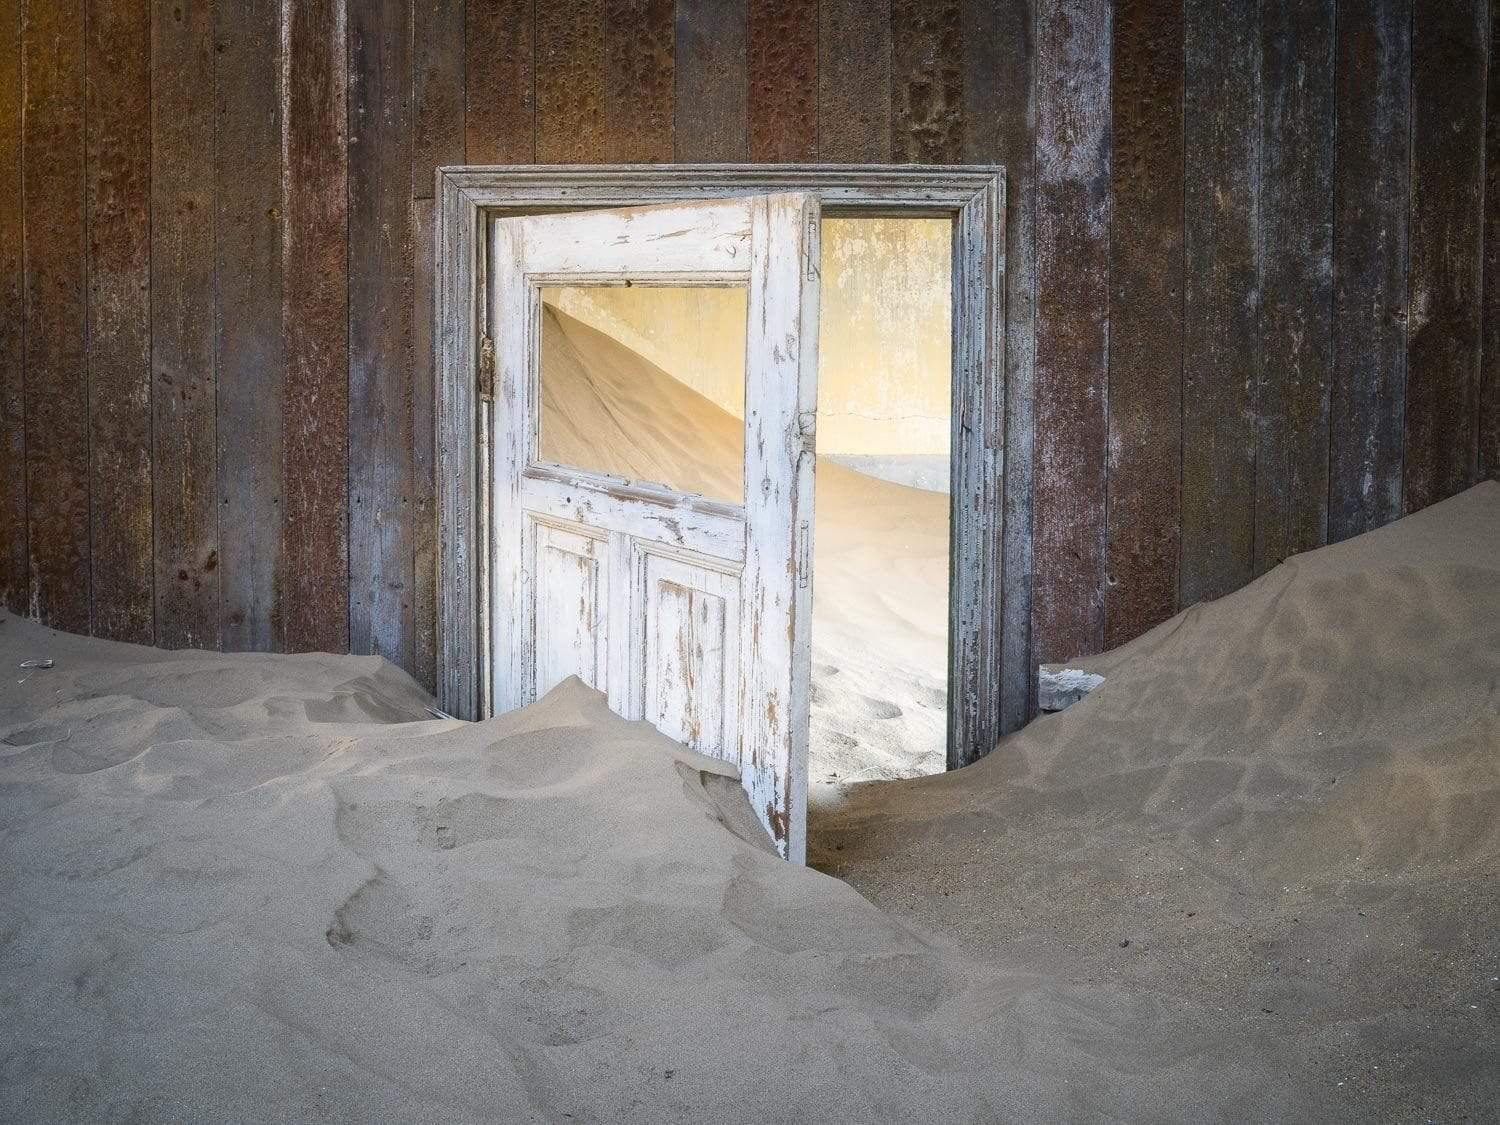 Making of a housing room with open door and a lot of construction sand, Kolmanskop #34